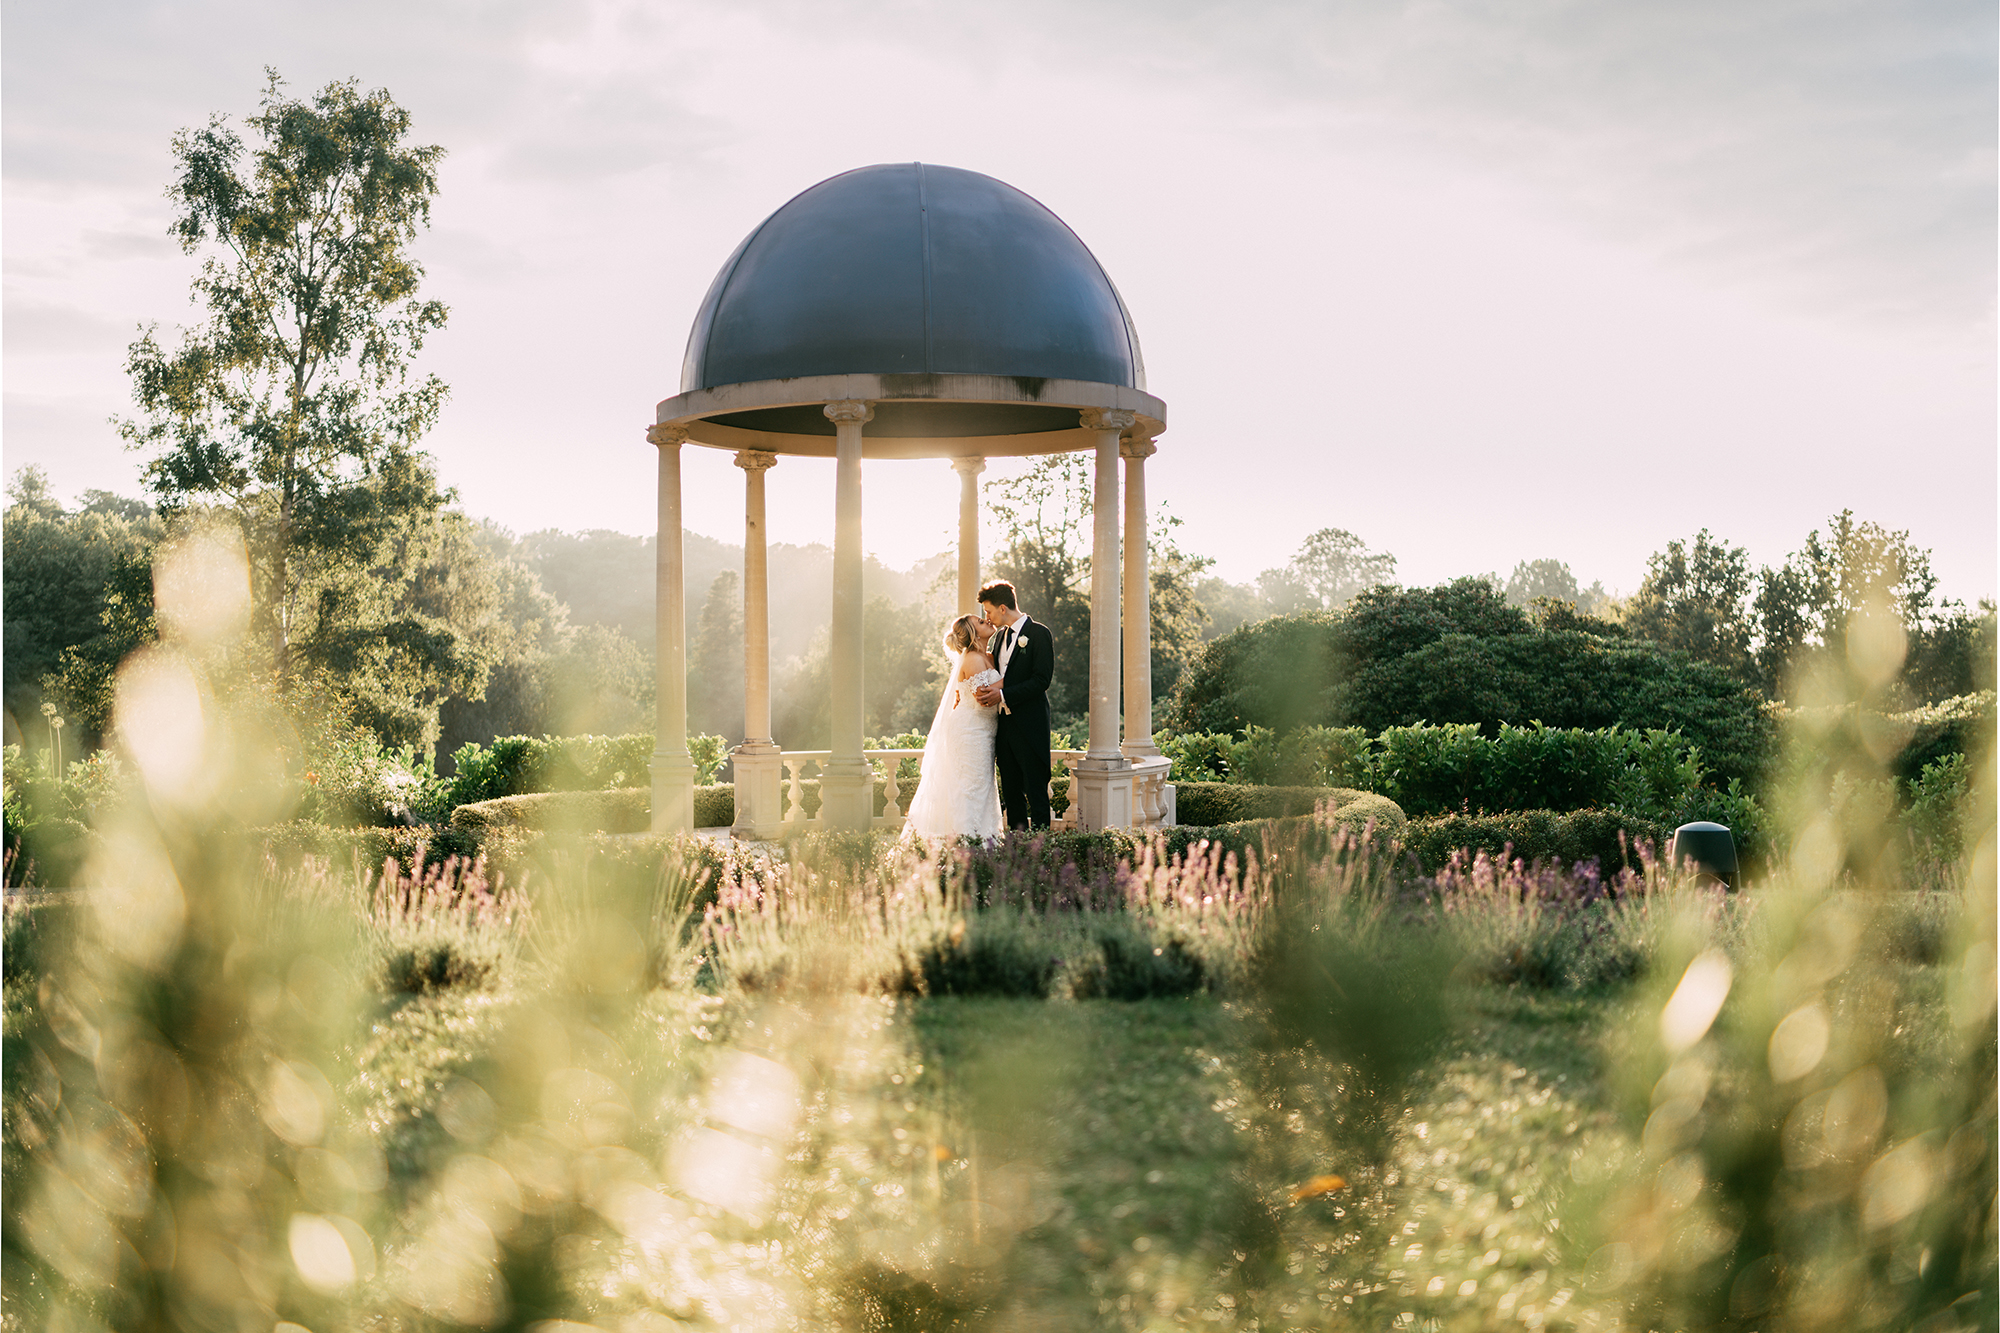 Beautifully lit wedding photography by Tom Cullen in Kent